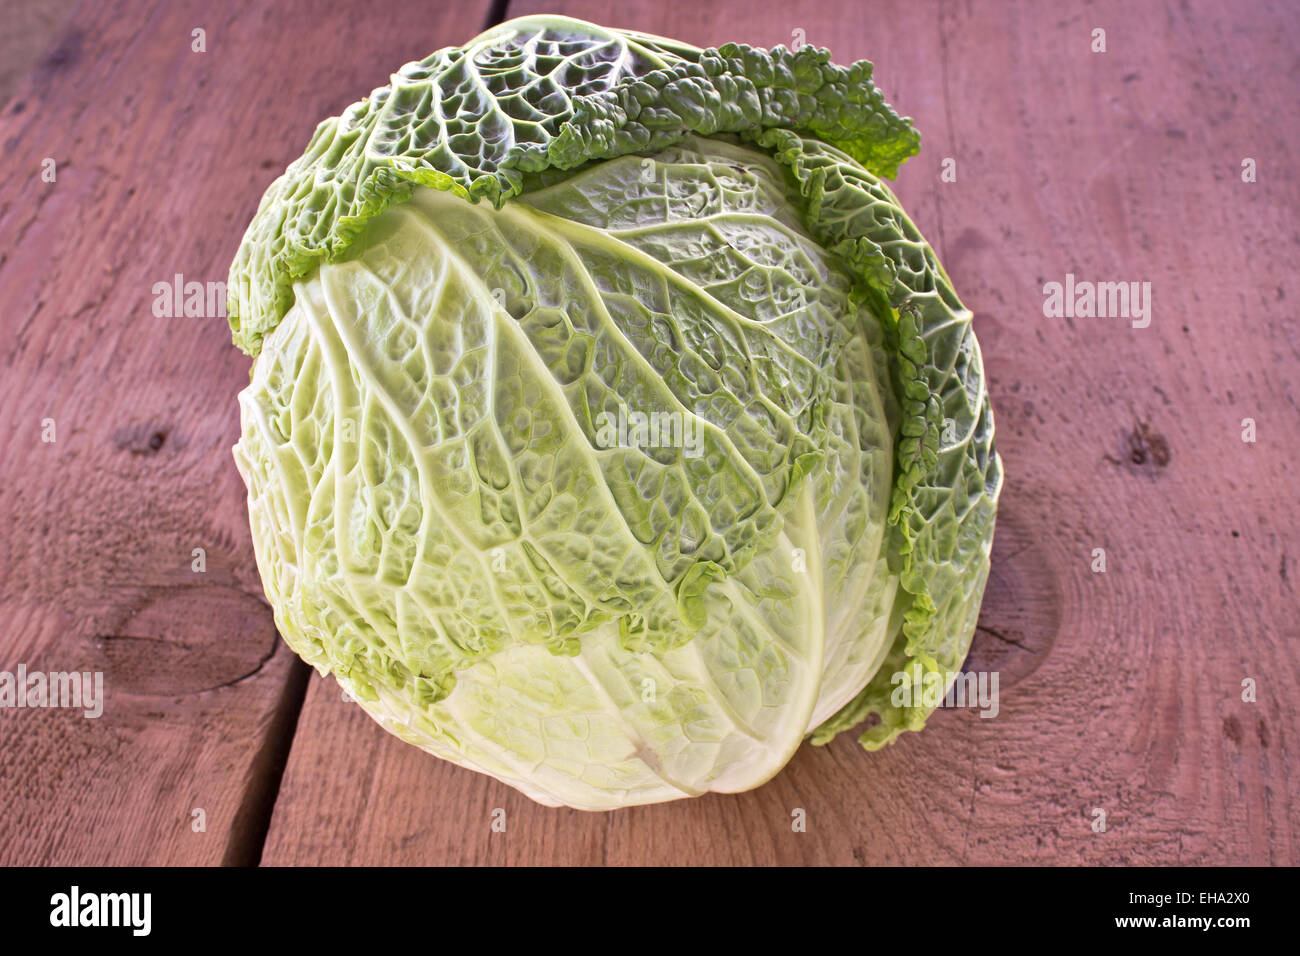 Kale vegetable on wooden background Stock Photo